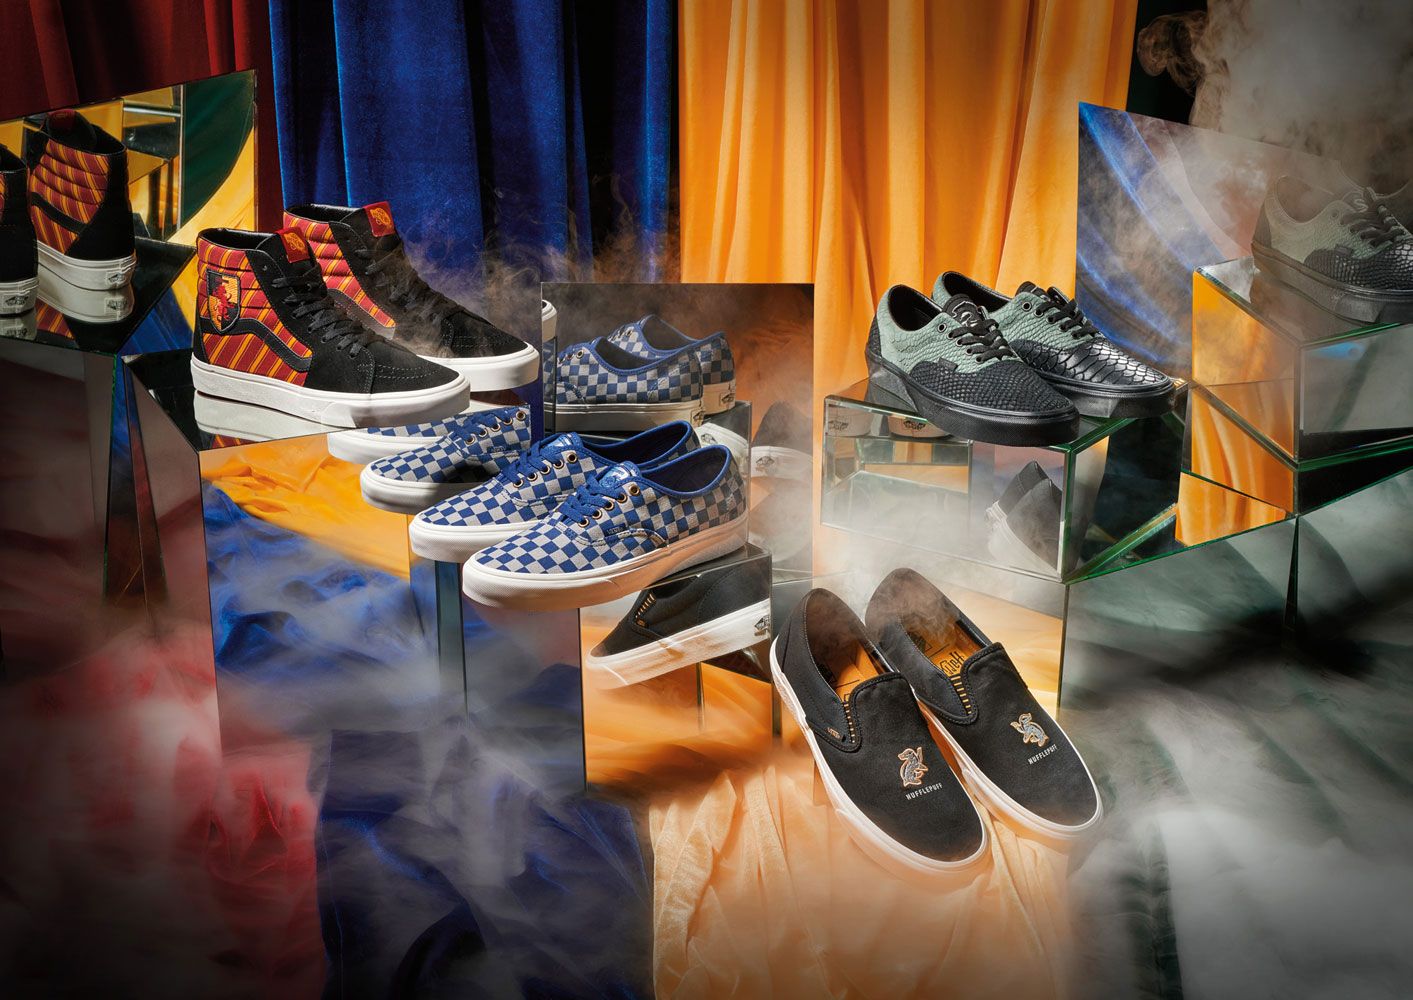 Harry Potter Vans  Harry potter shoes, Harry potter accessories, Harry  potter outfits